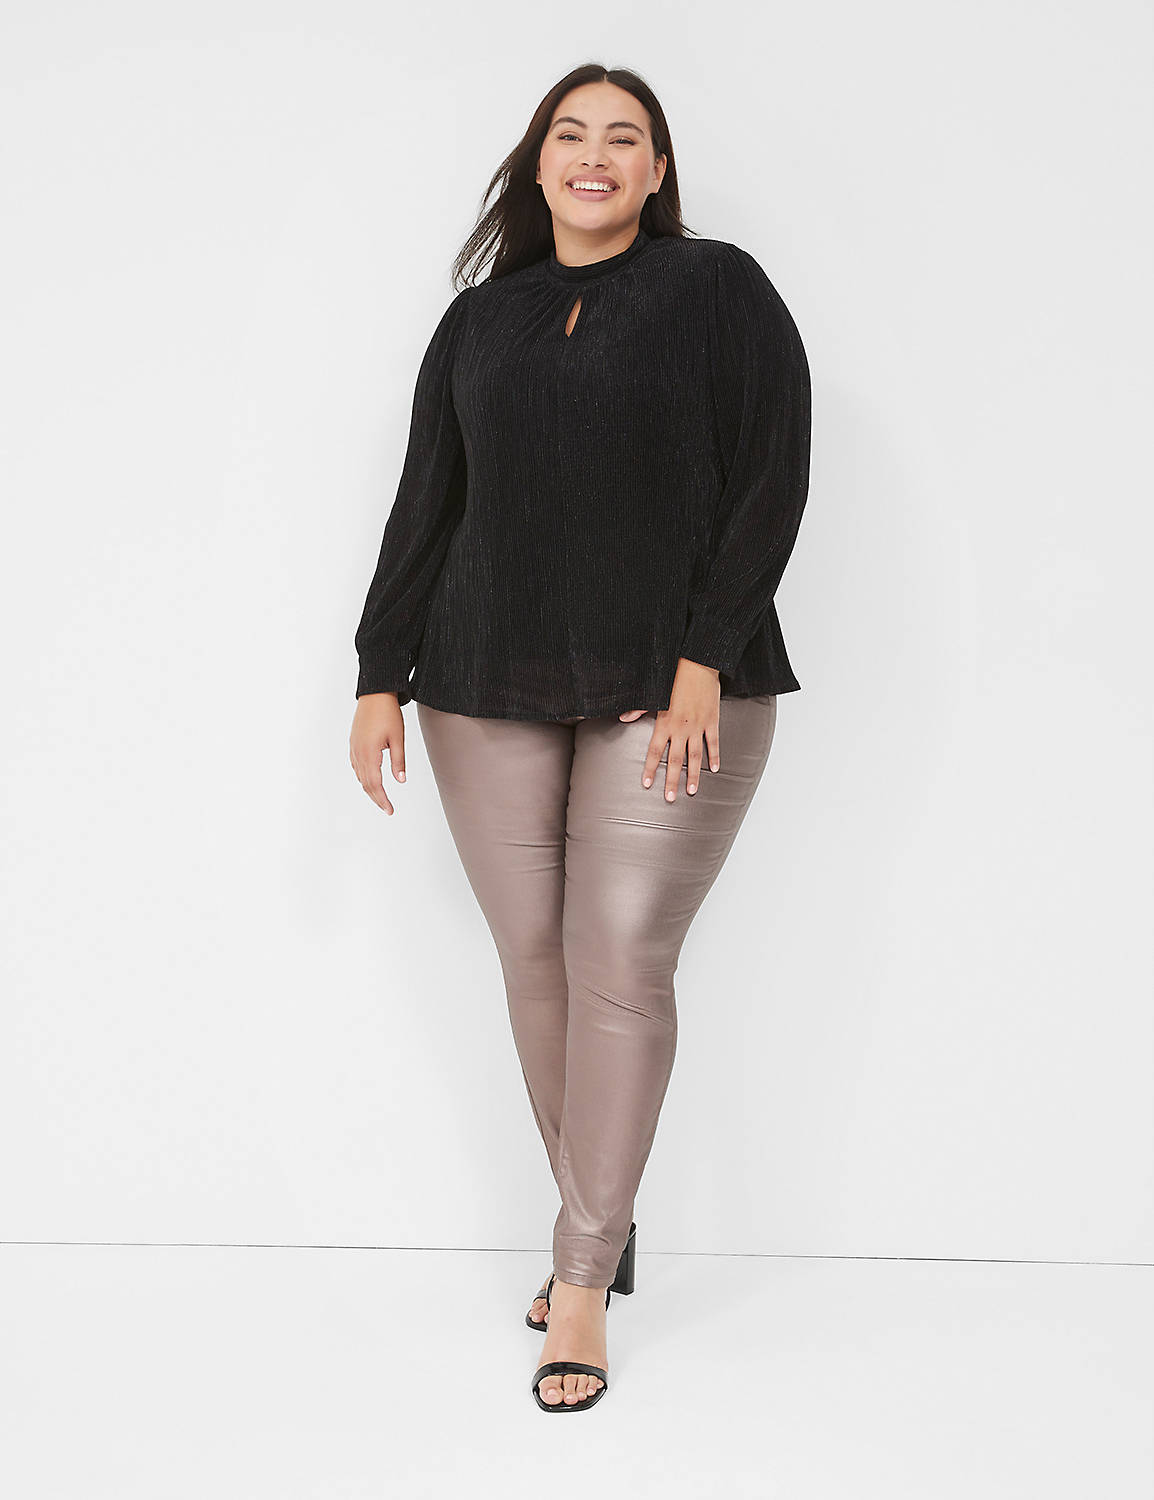 SIGNATURE HIGH RISE PULL ON JEGGING Product Image 3